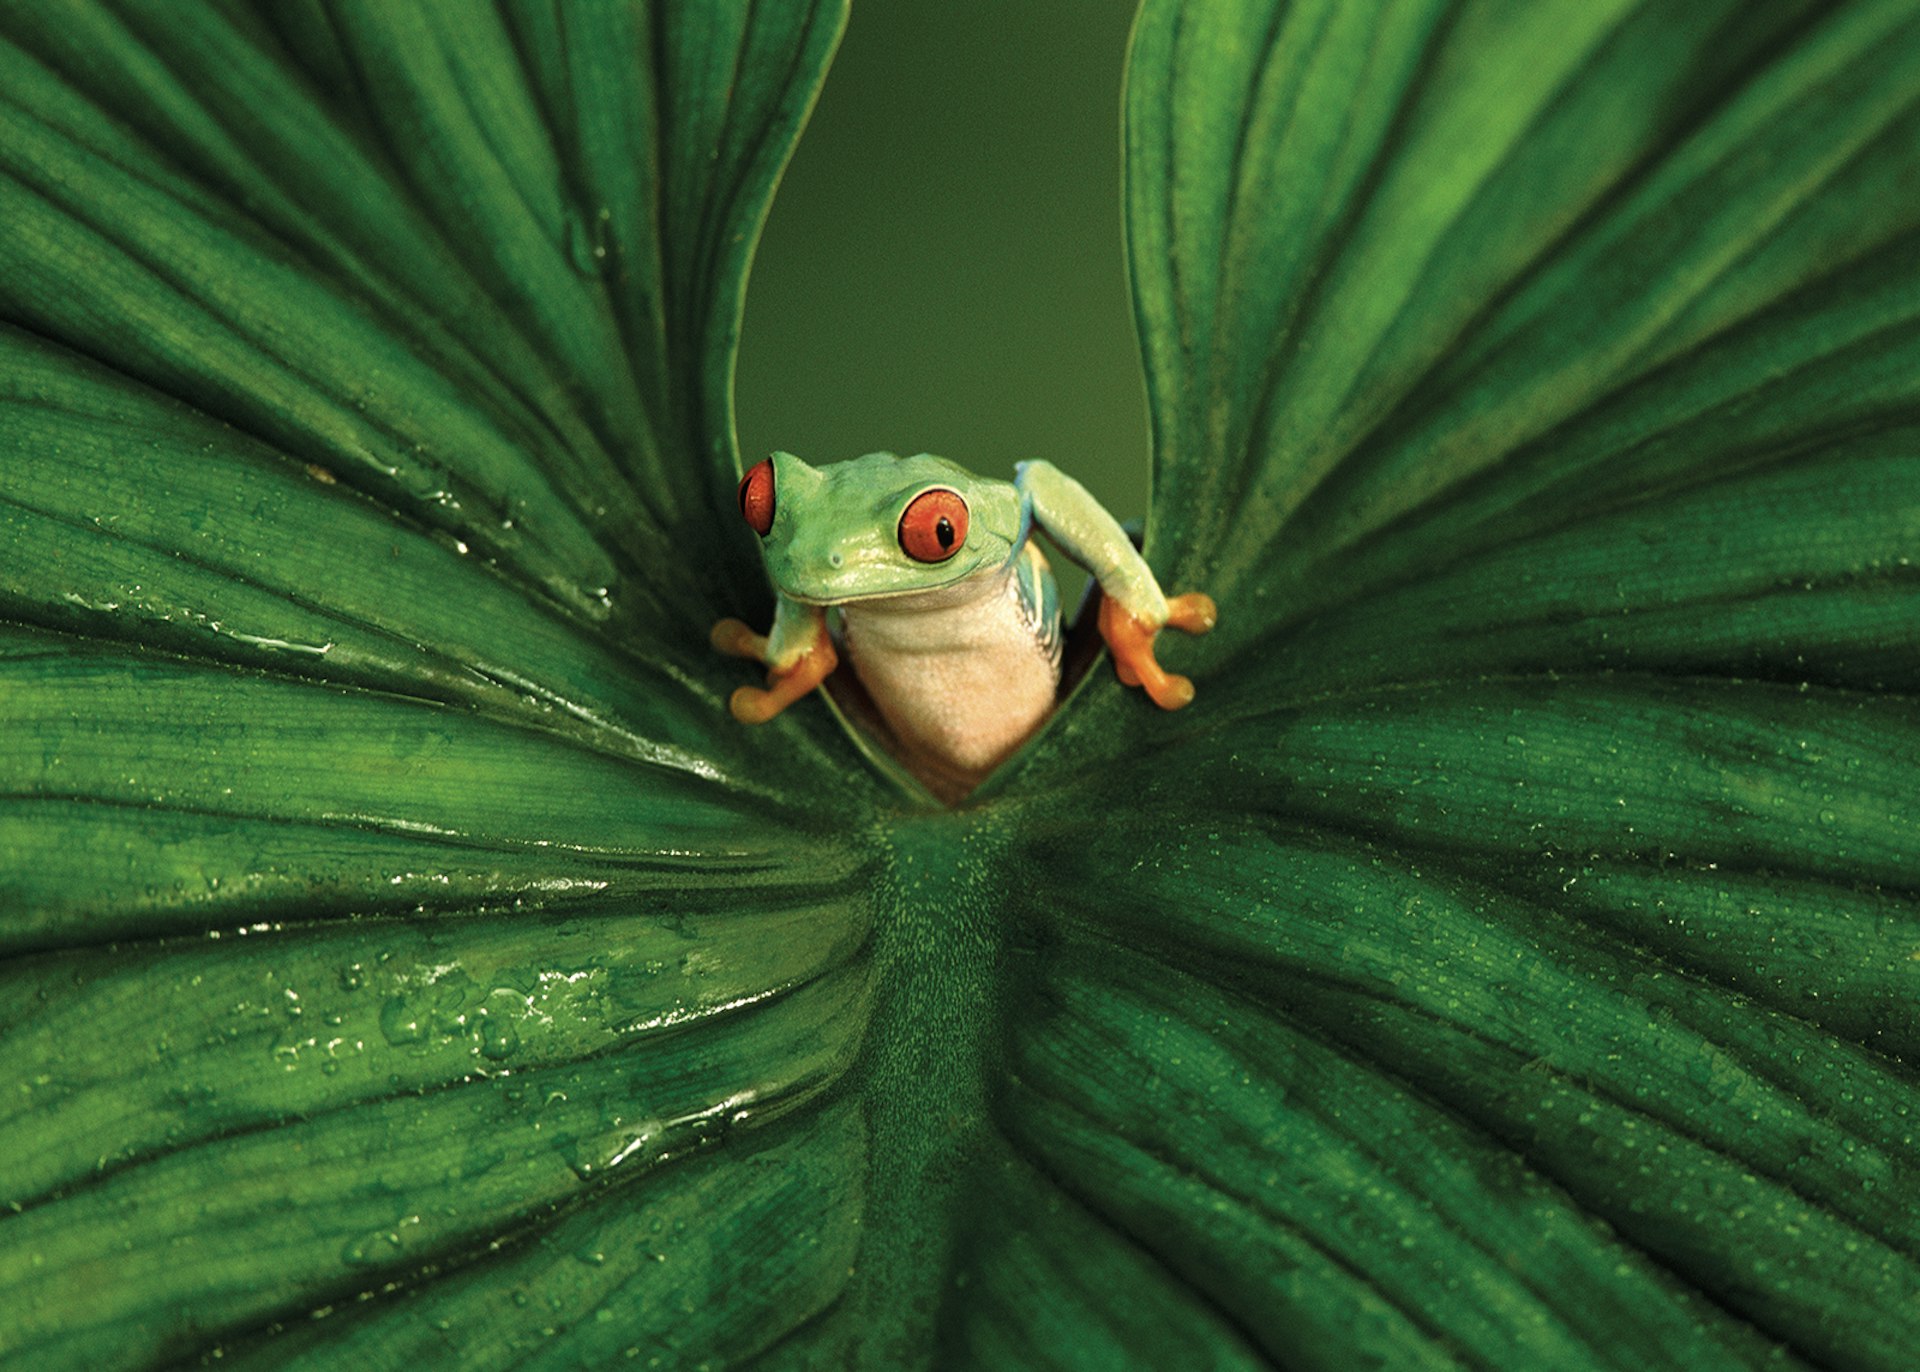  A red-eyed tree frog on a leaf